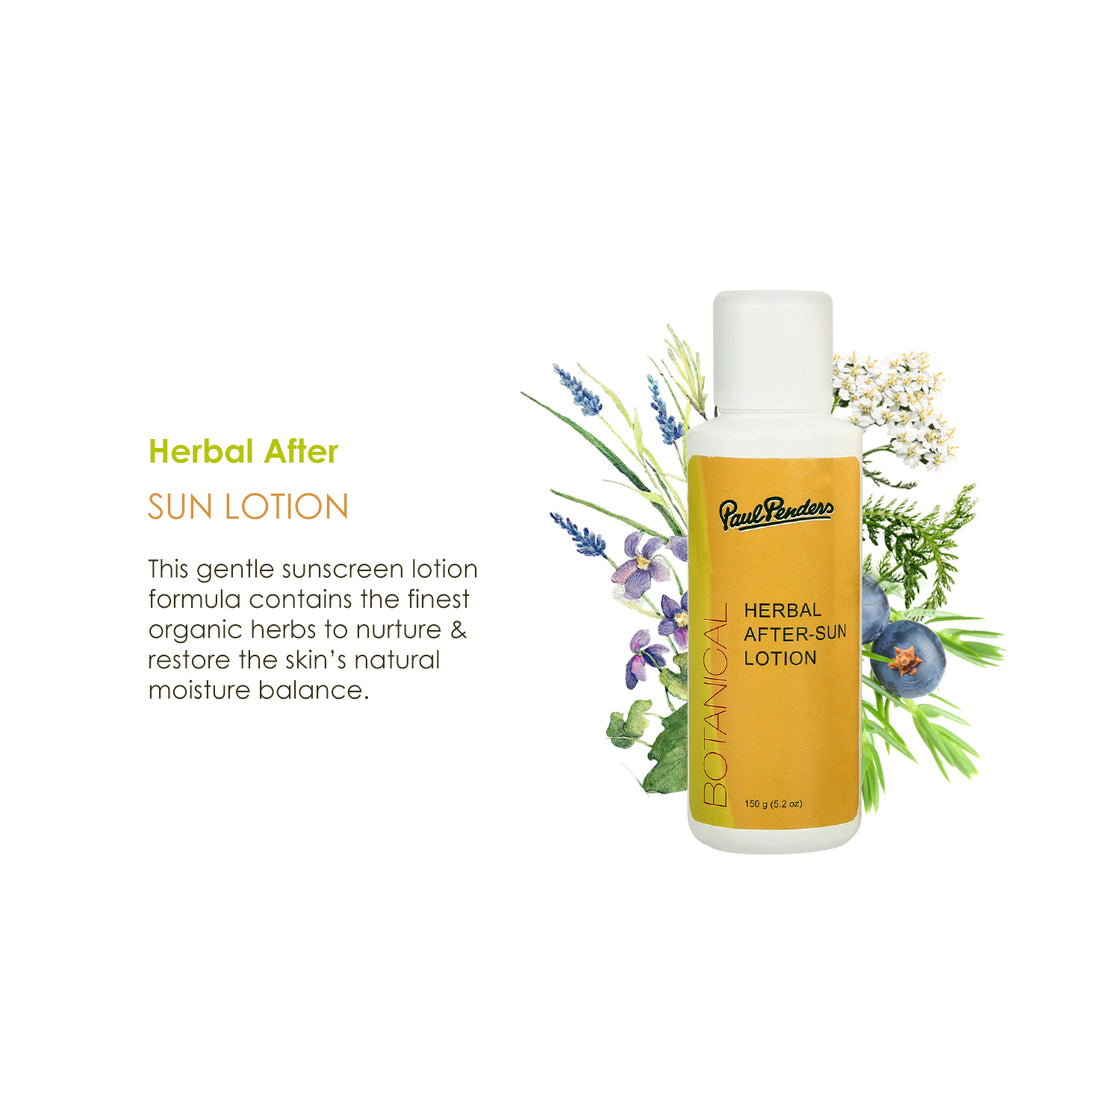 Herbal After-Sun Lotion